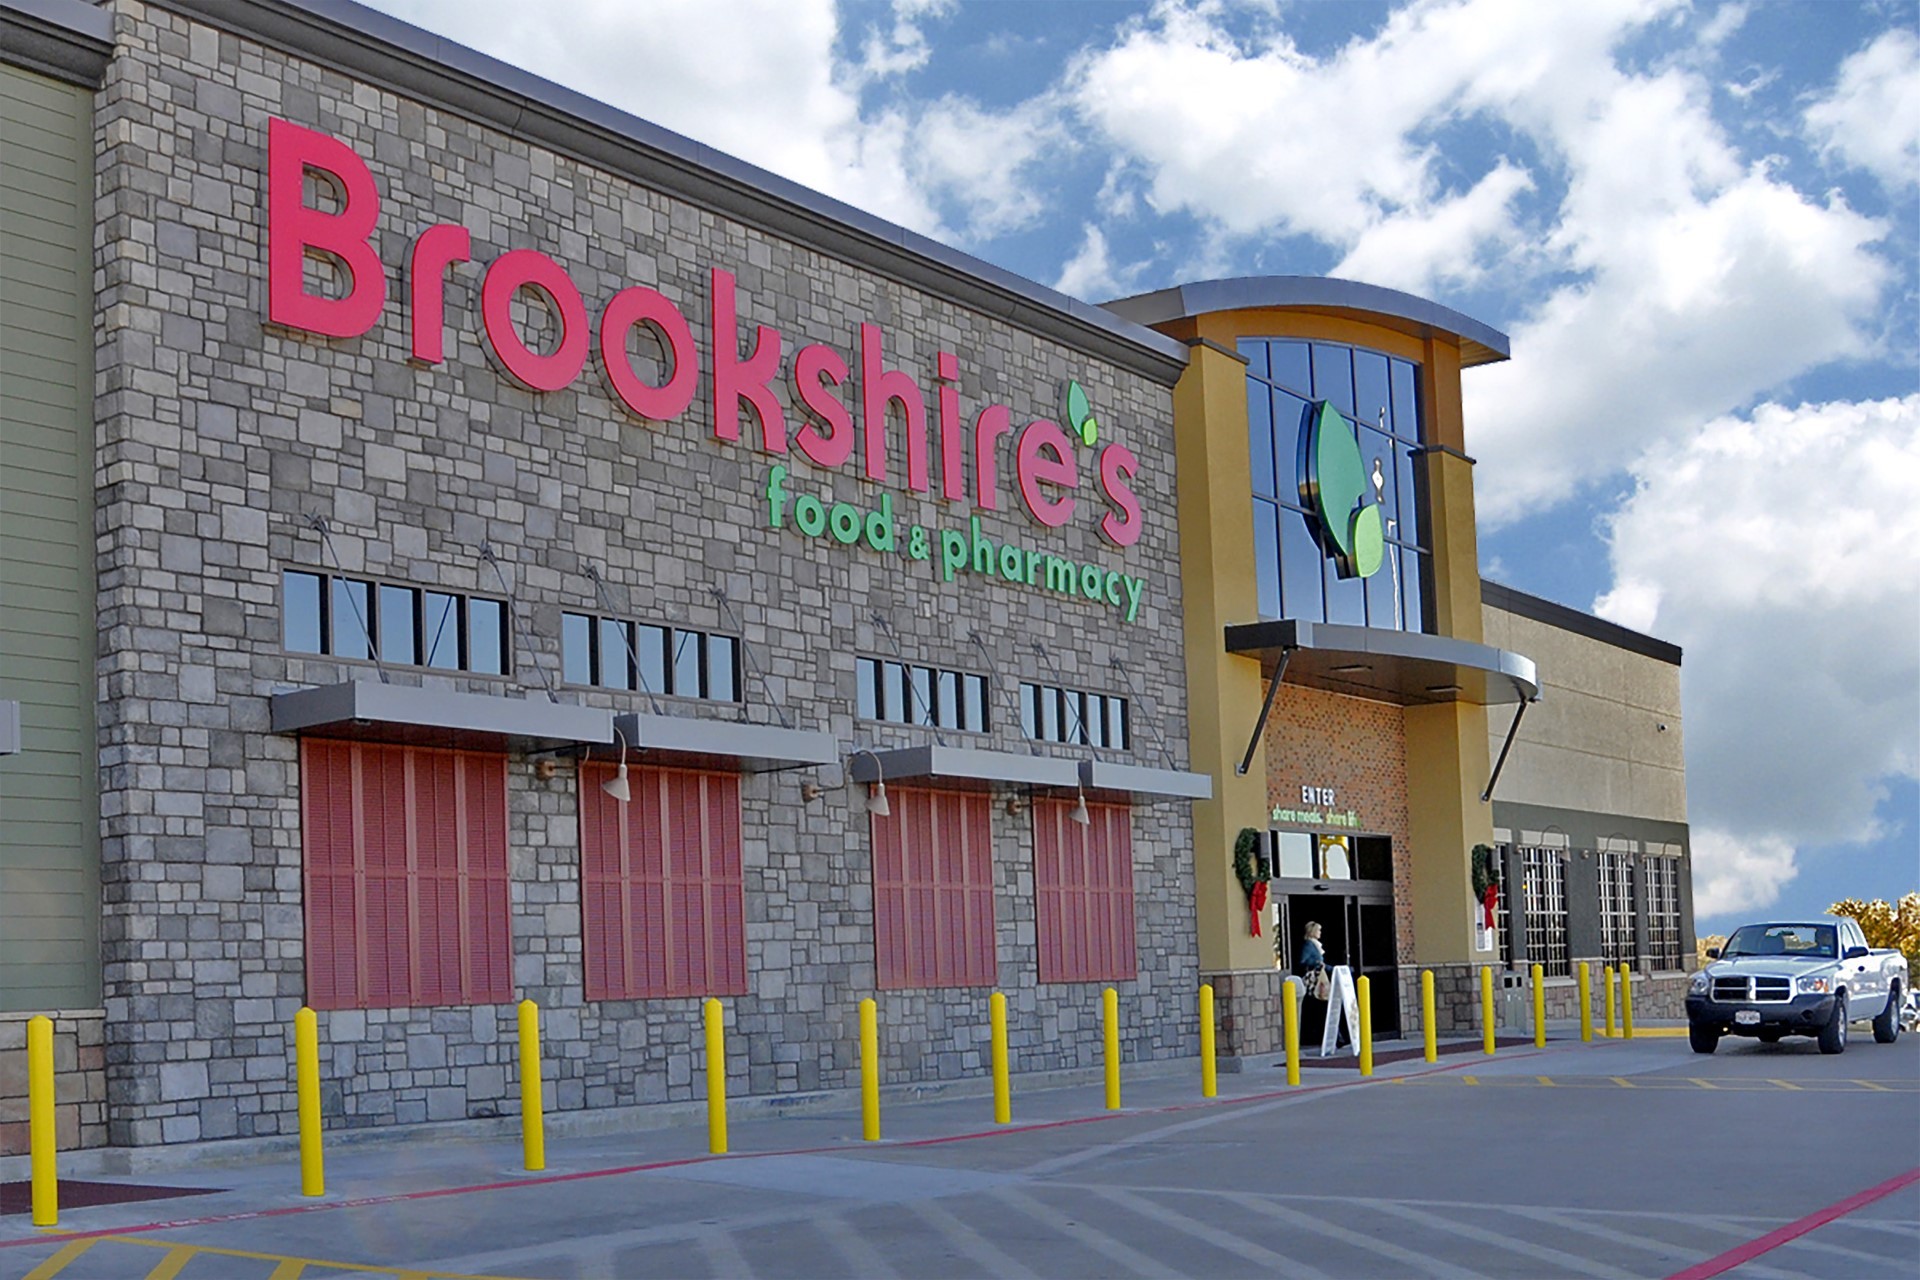 Press Release: Brookshire Grocery Co. Celebrates 95th Anniversary